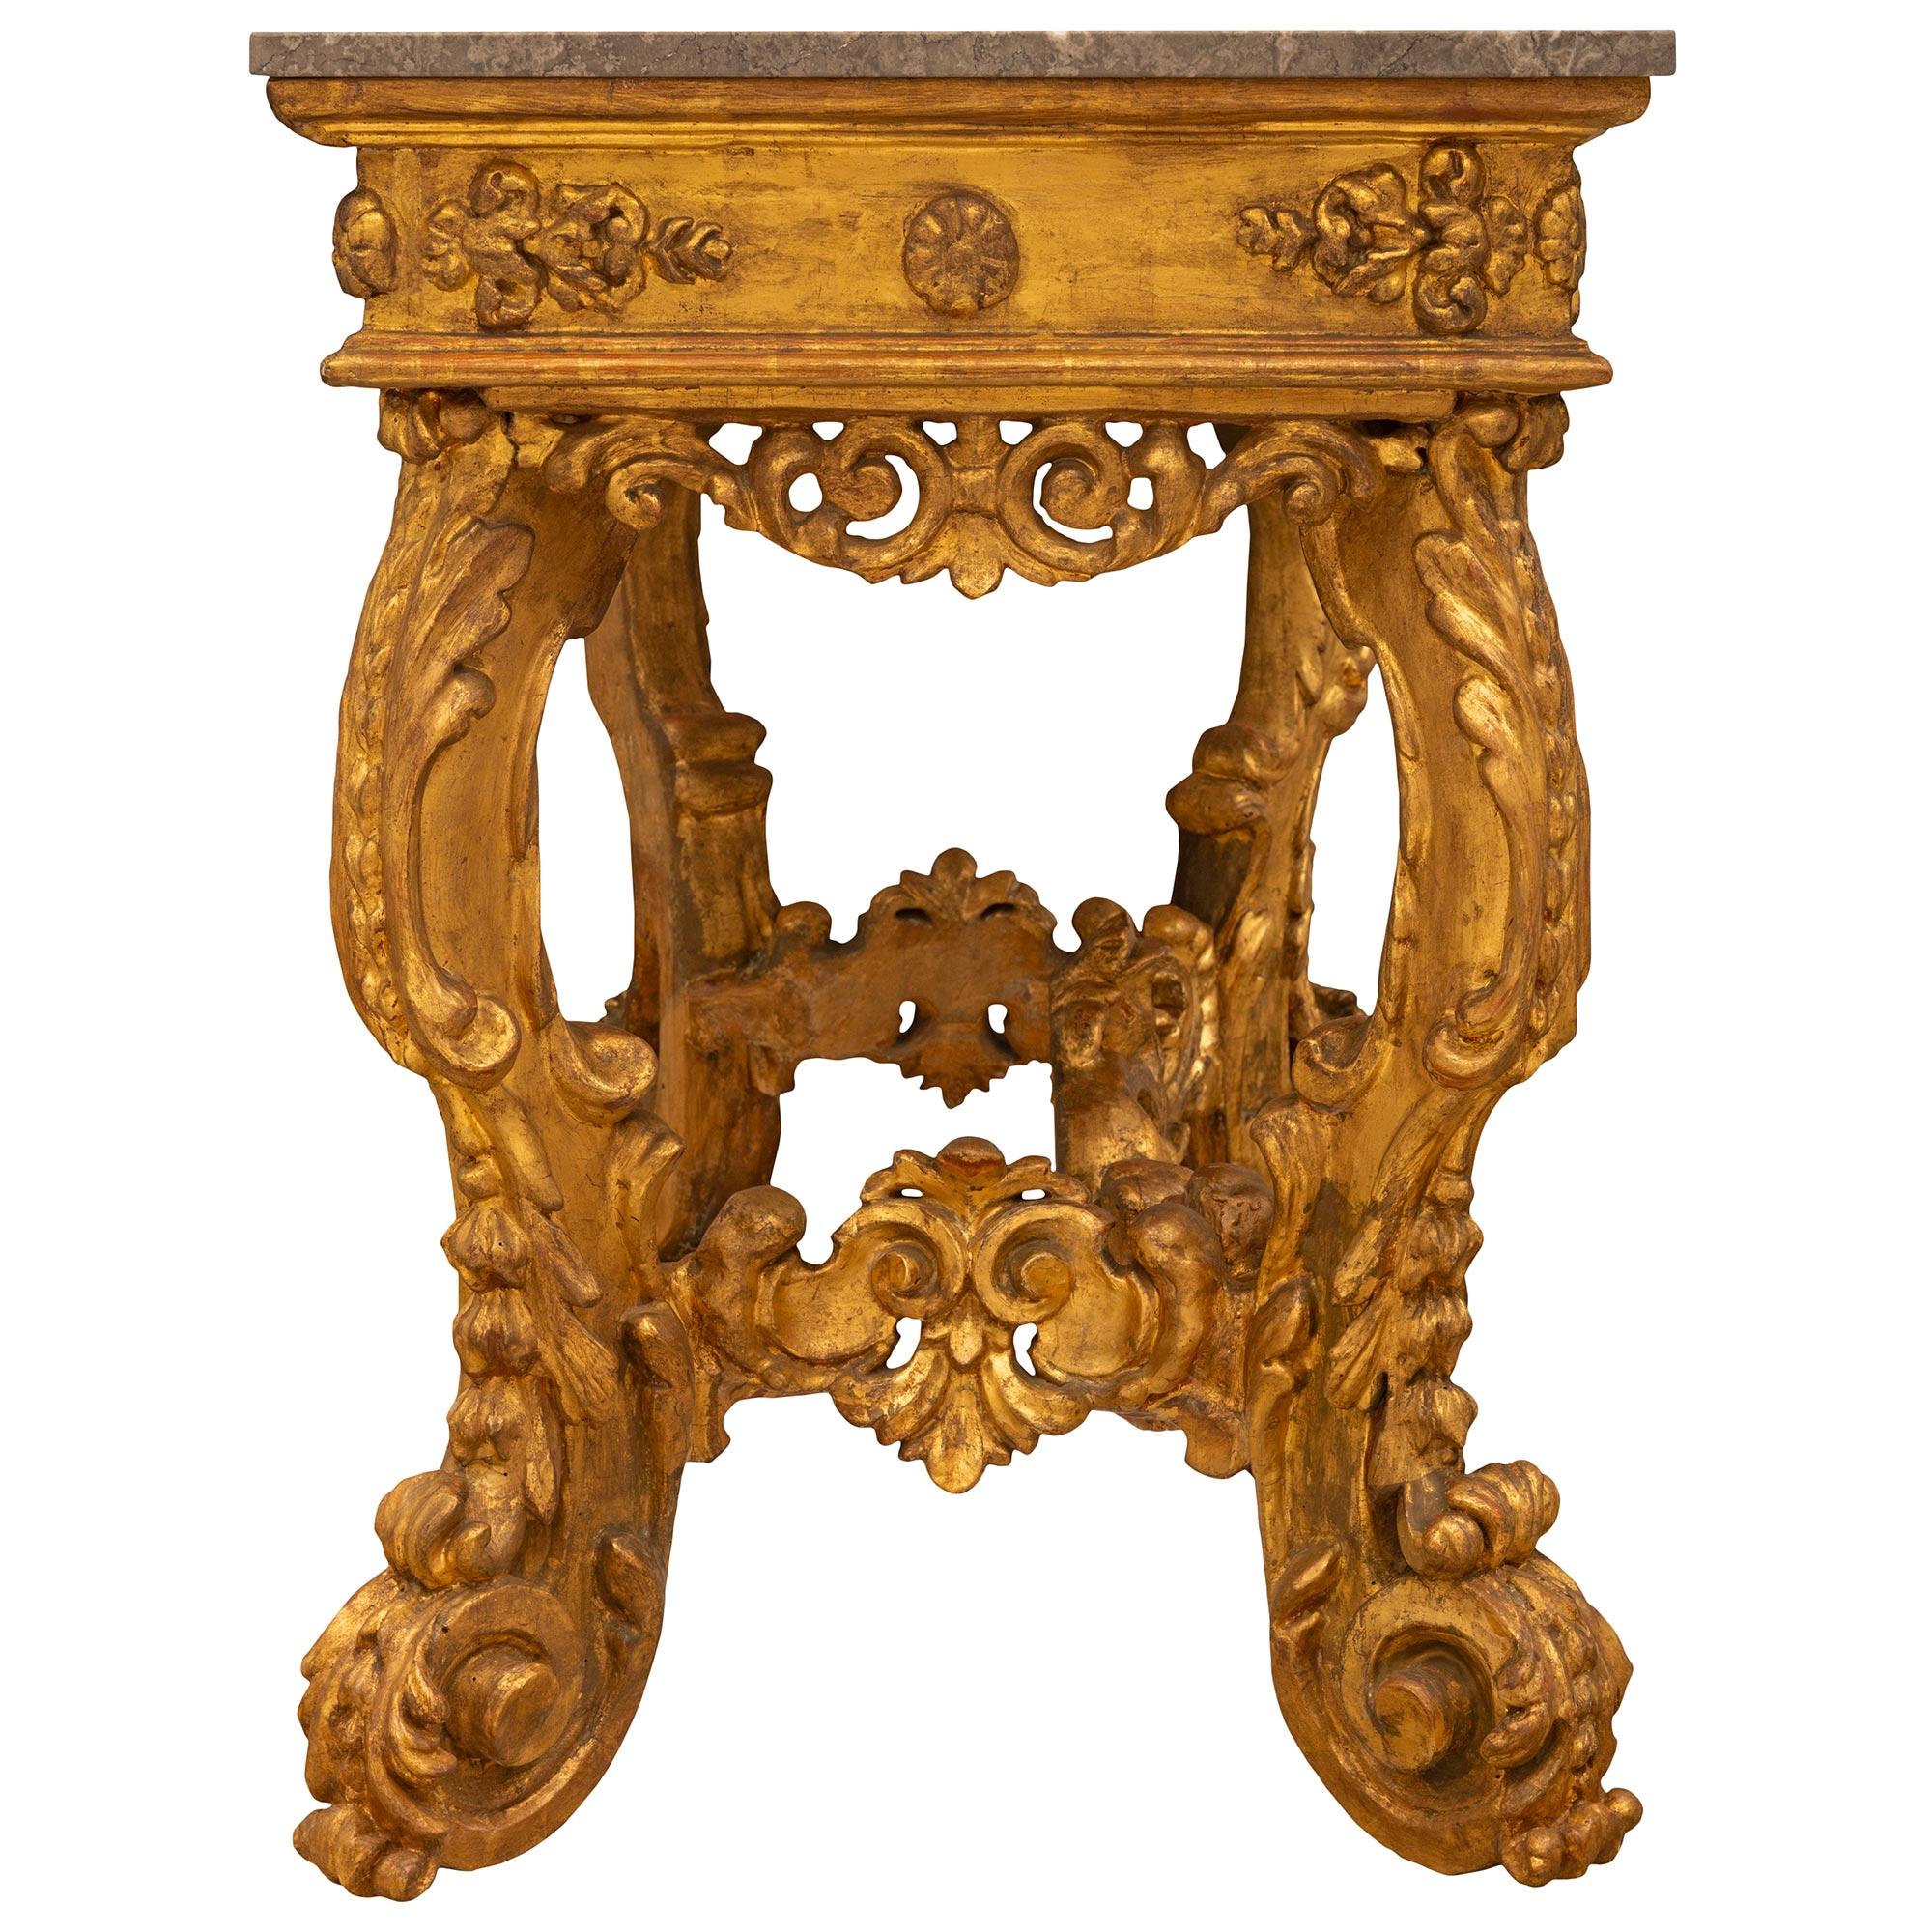 Italian Early 18th Century Louis XIV Period Gilt Wood Console In Good Condition For Sale In West Palm Beach, FL